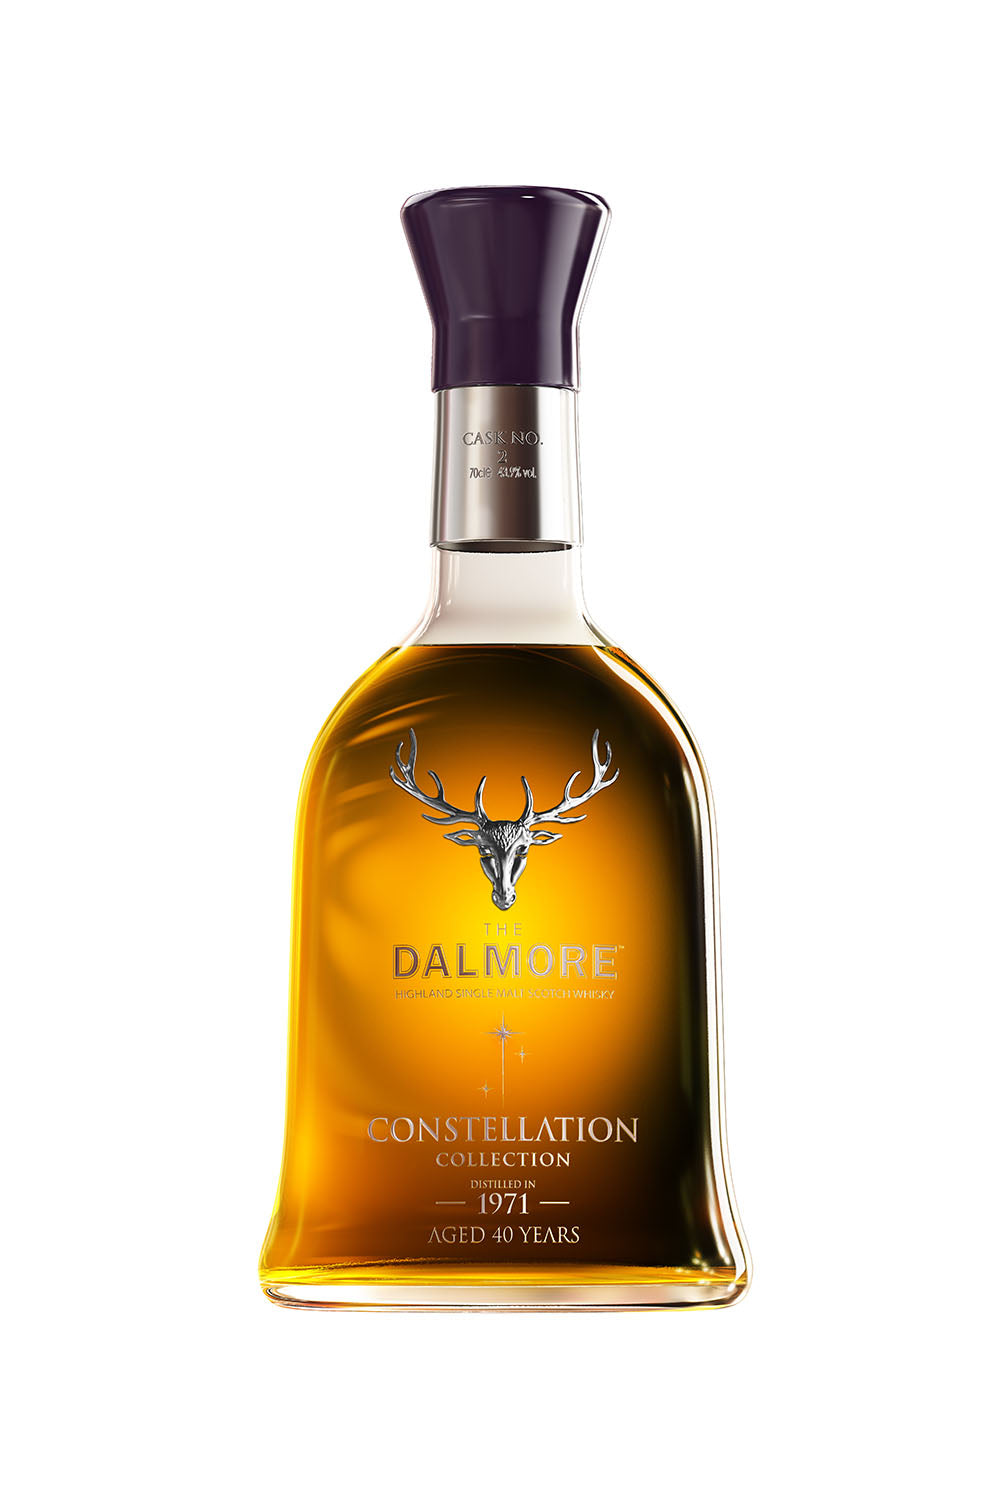 The Dalmore 1971 Constellation - Cask 2